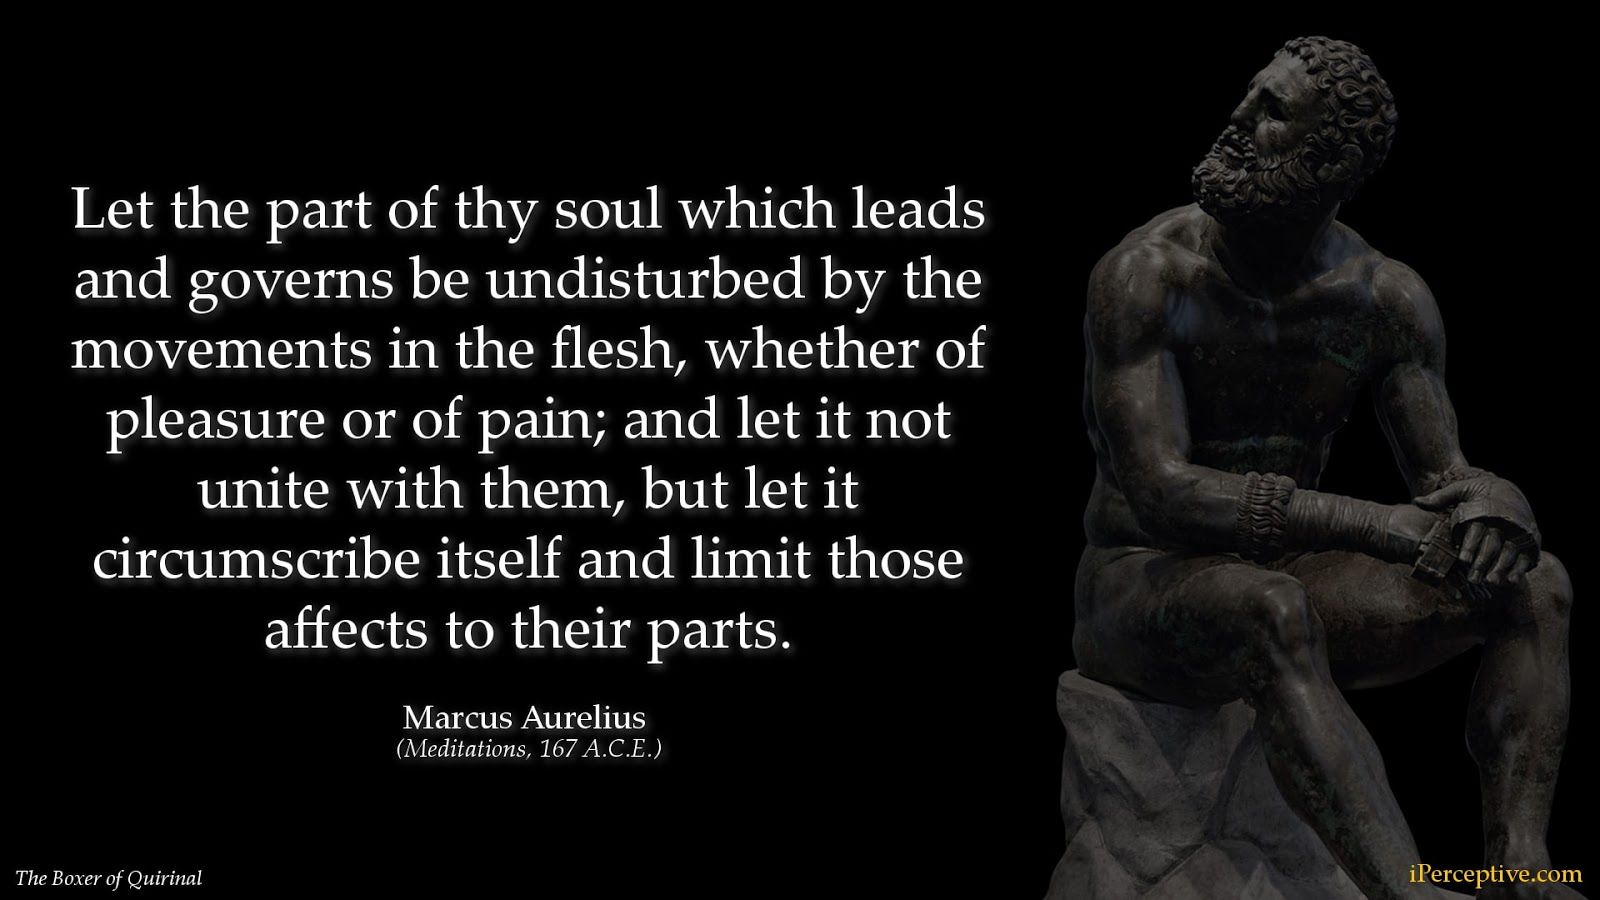 Marcus Aurelius Best inspiring Image and Sayings from his Meditations